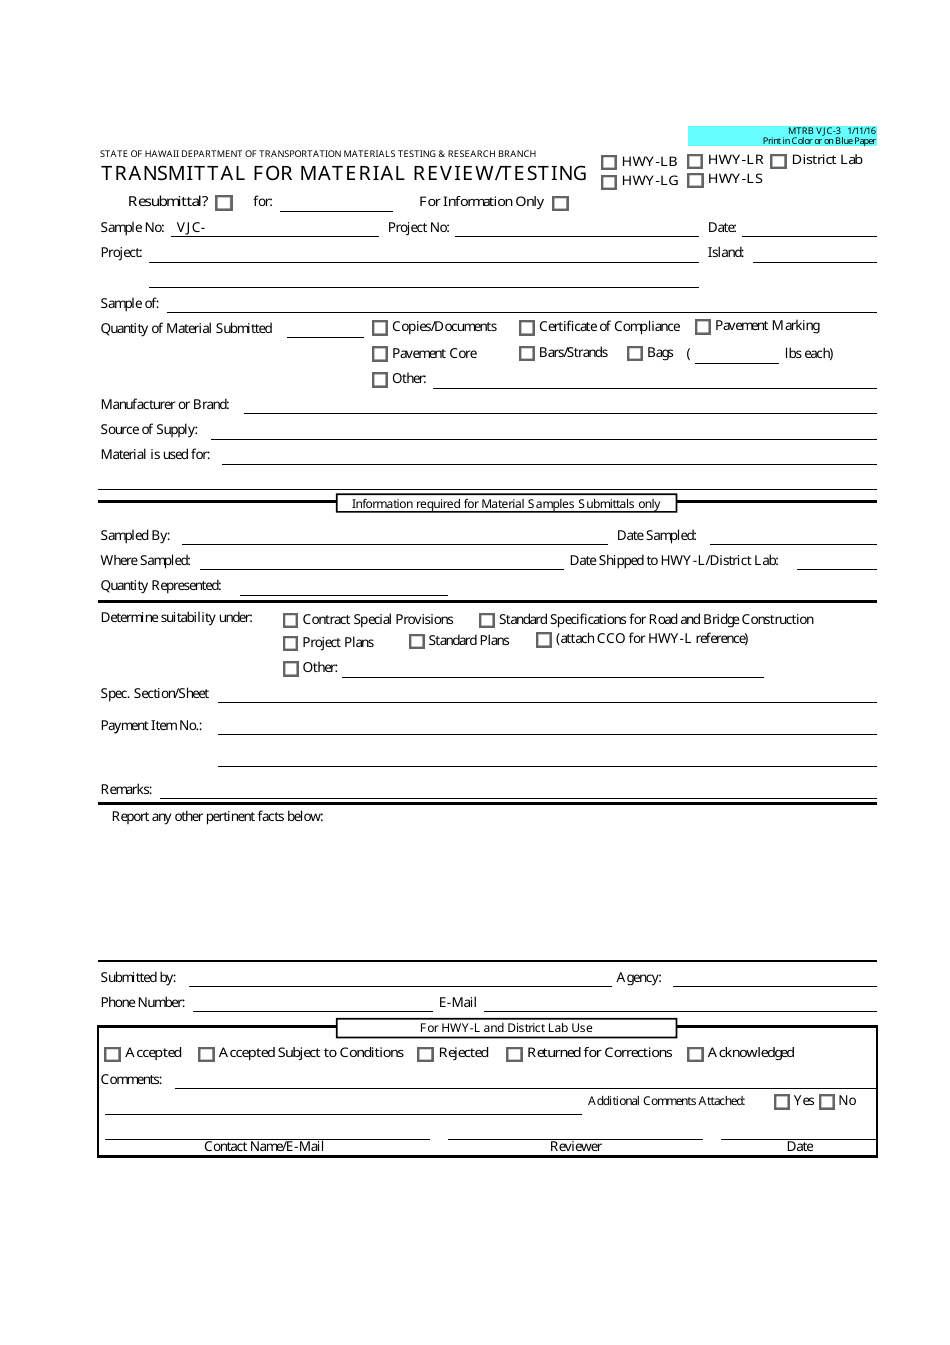 Form MTRB VJC-3 Transmittal for Material Review / Testing - Hawaii, Page 1